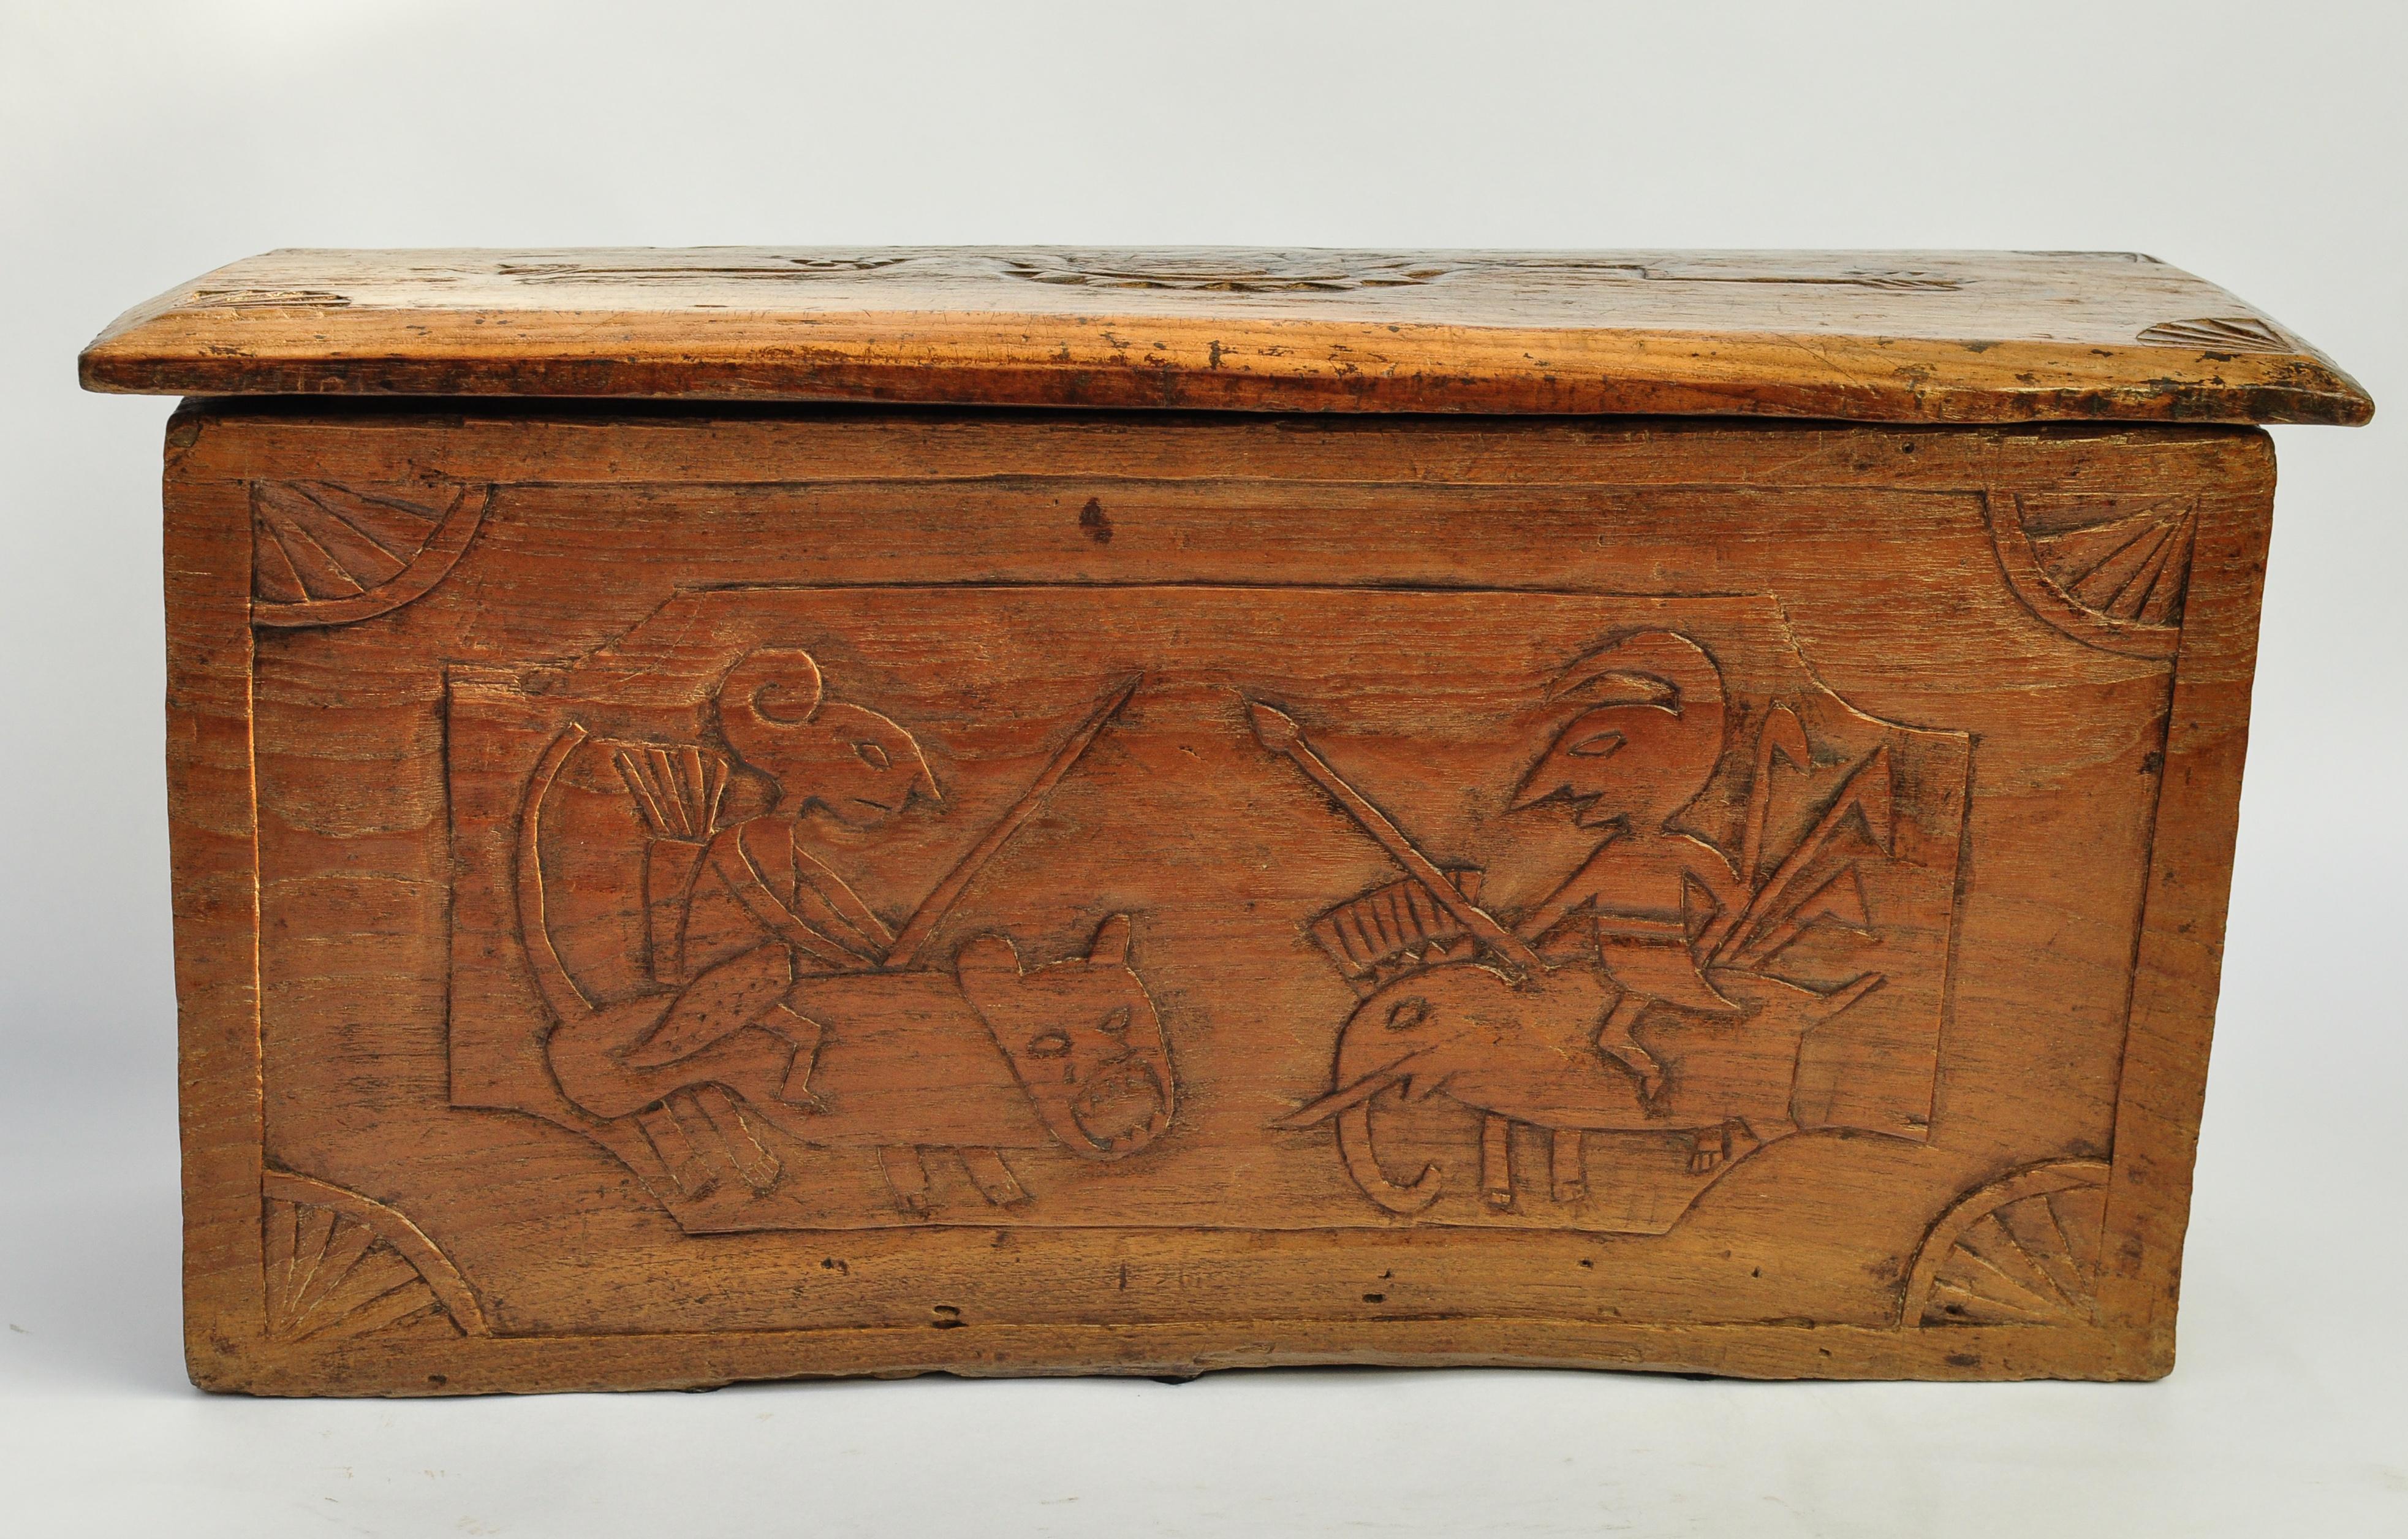 Vintage solid teak storage box with carvings. Java, Early to Mid-20th Century. 
This absolutely charming box, in a rural folk art style, is hewn out of a single piece of teak. On the one side two warriors face off, one mounted on a tiger, the other